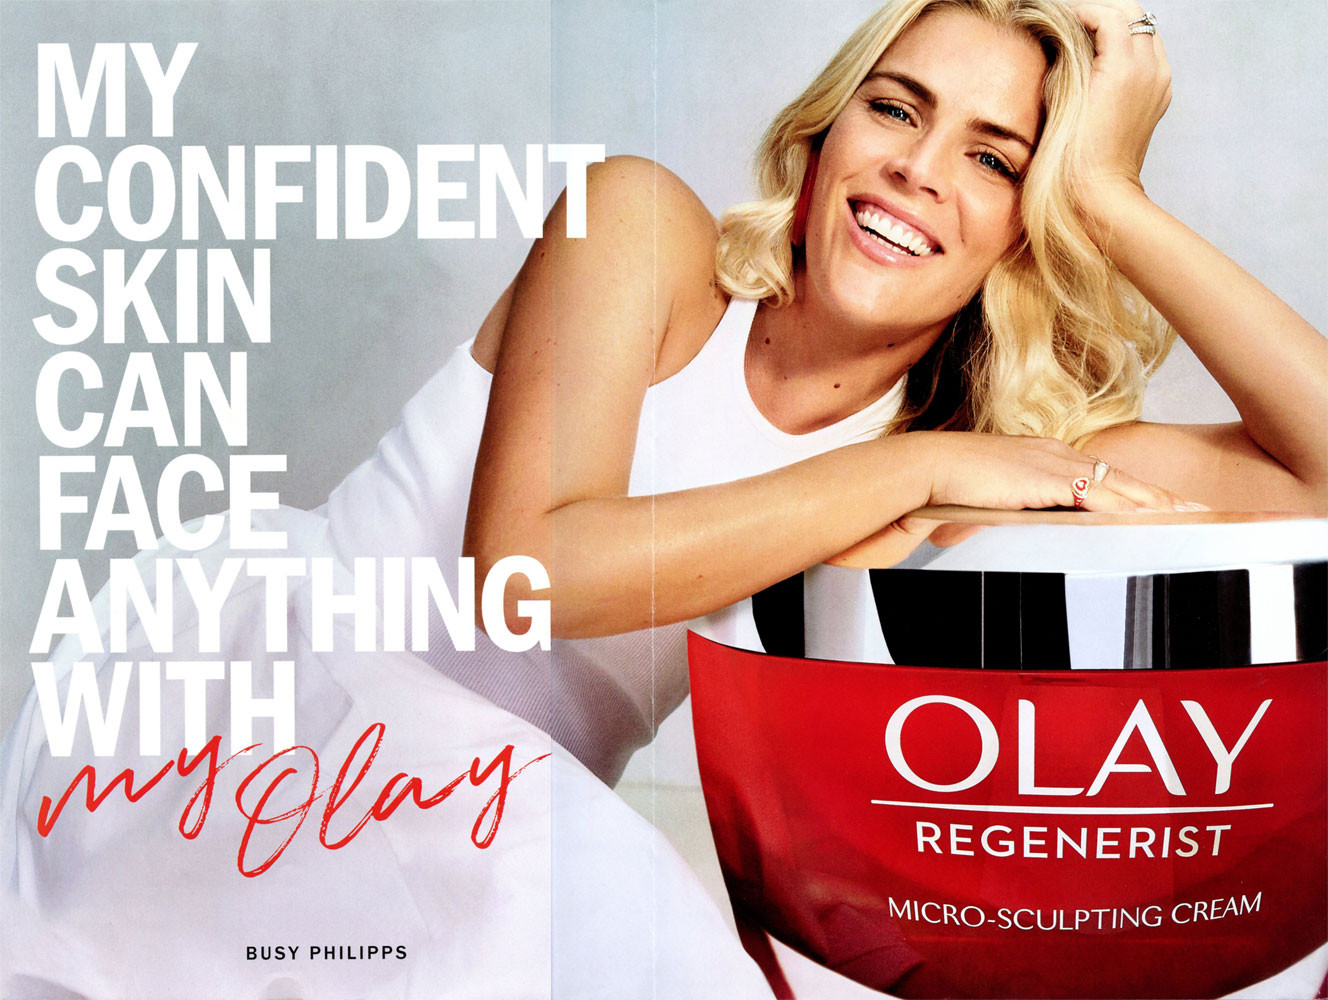 Busy Philipps Actress Celebrity Endorsements Celebrity Advertisements Celebrity Endorsed 